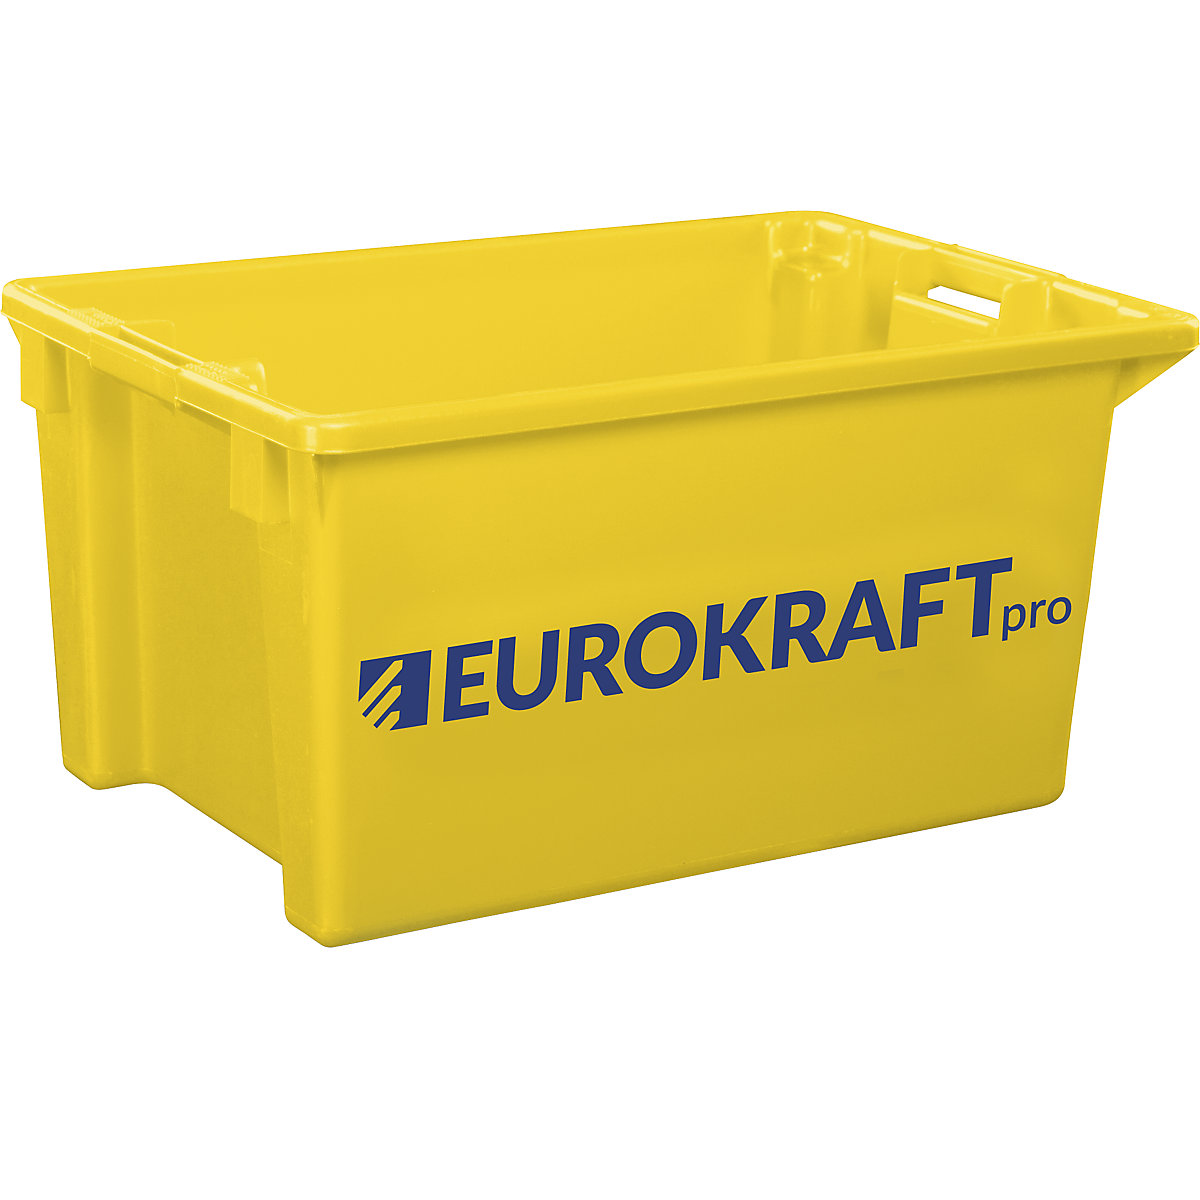 EUROKRAFTpro – Stack/nest container made of polypropylene suitable for foodstuffs, 70 l capacity, pack of 2, solid walls and base, yellow